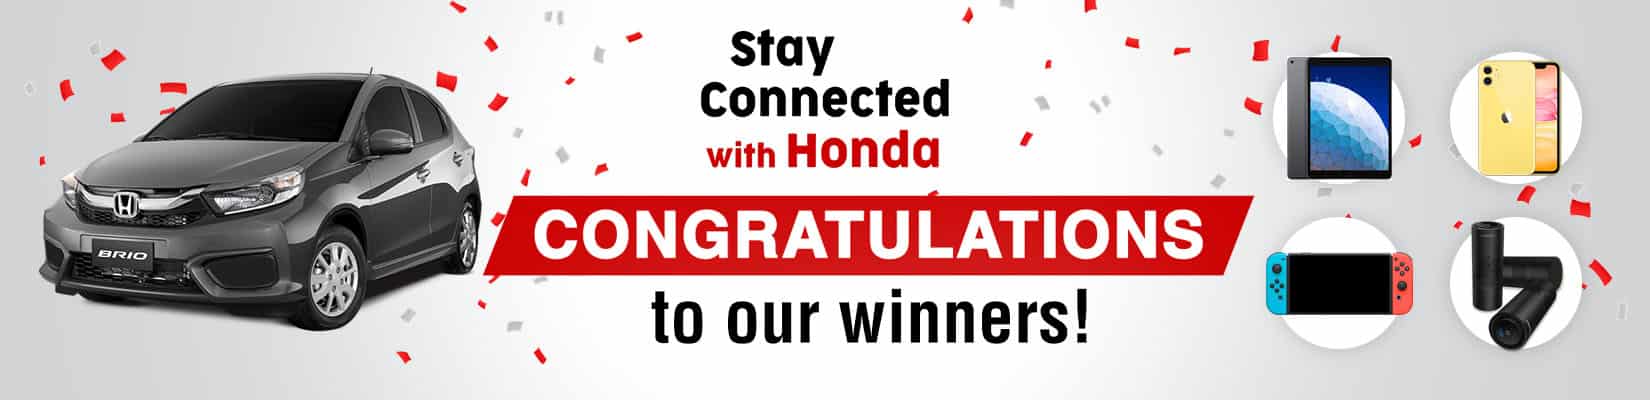 Stay Connected With Honda Raffle Winners